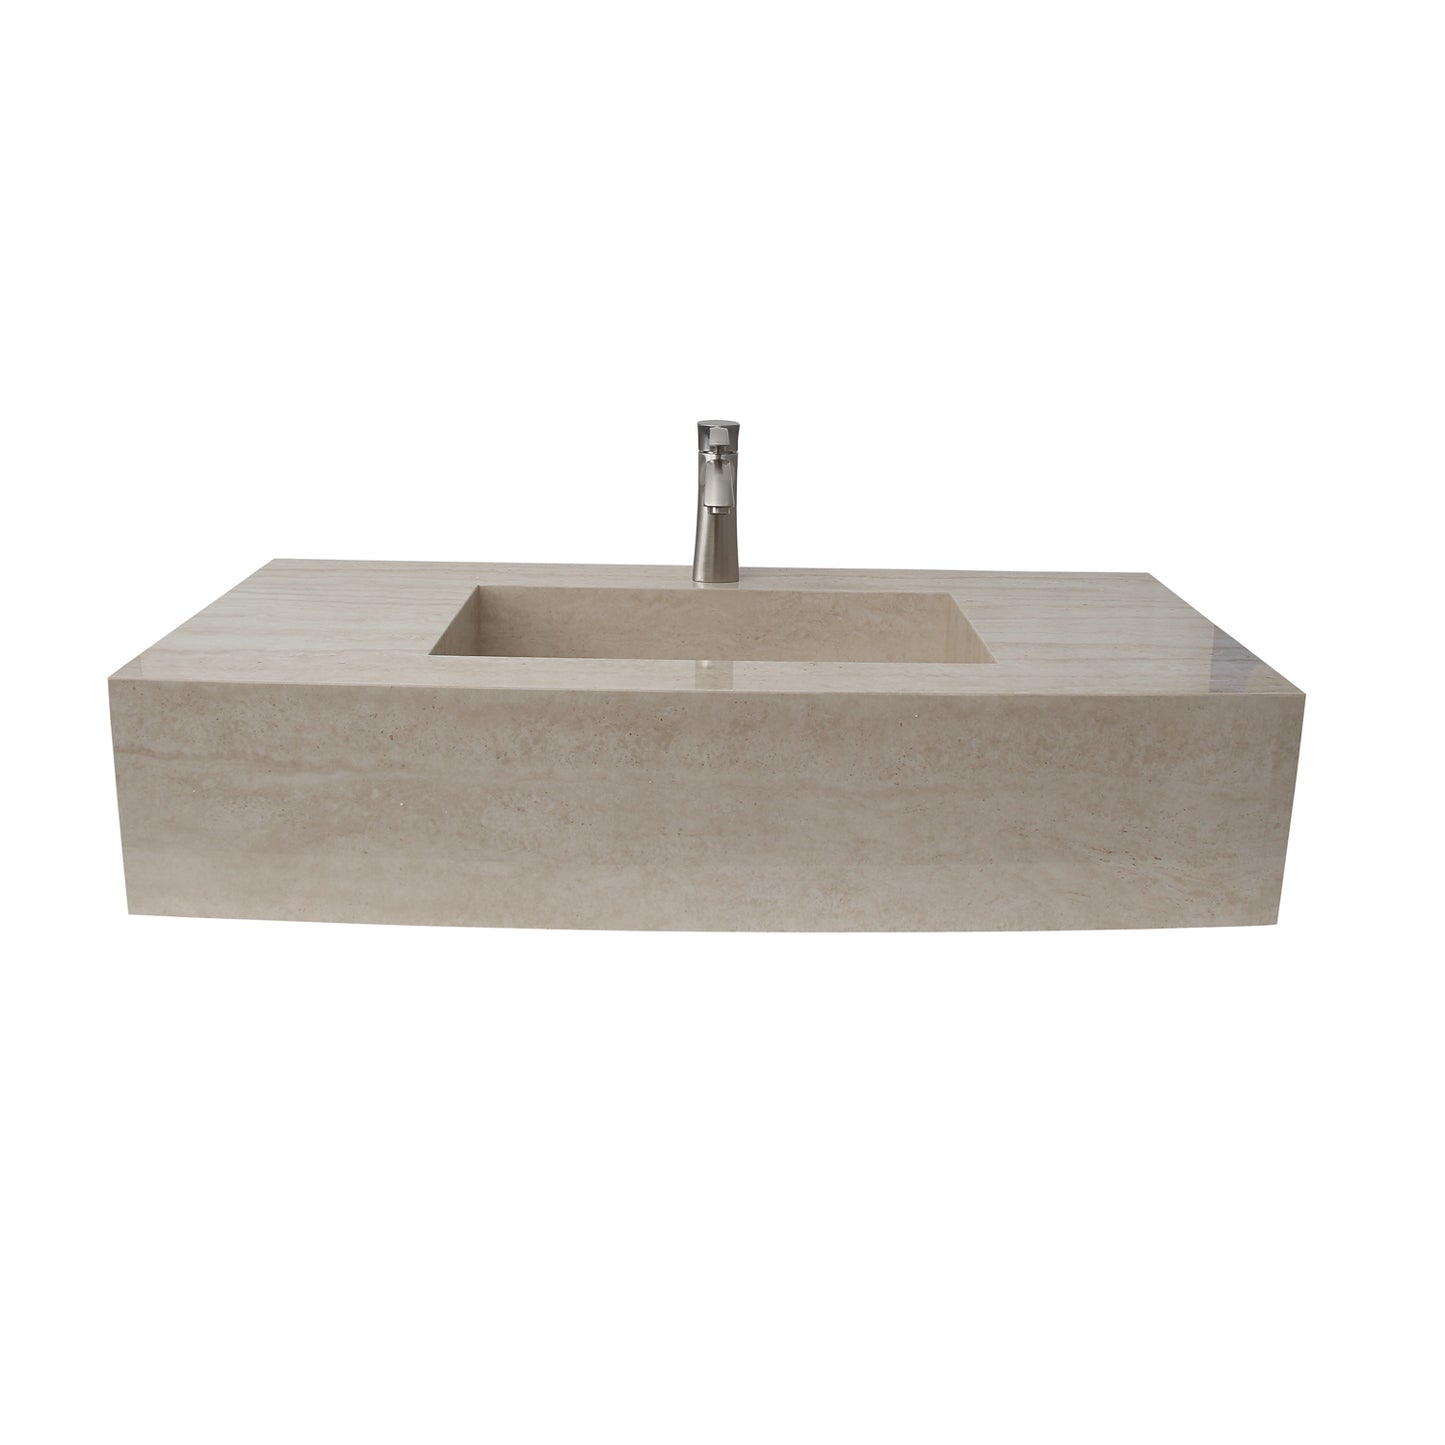 Precious 40-5/8" Wall-Hung Porcelain Tile Sink Hidden Drain 1-Hole Faucet in Ivory